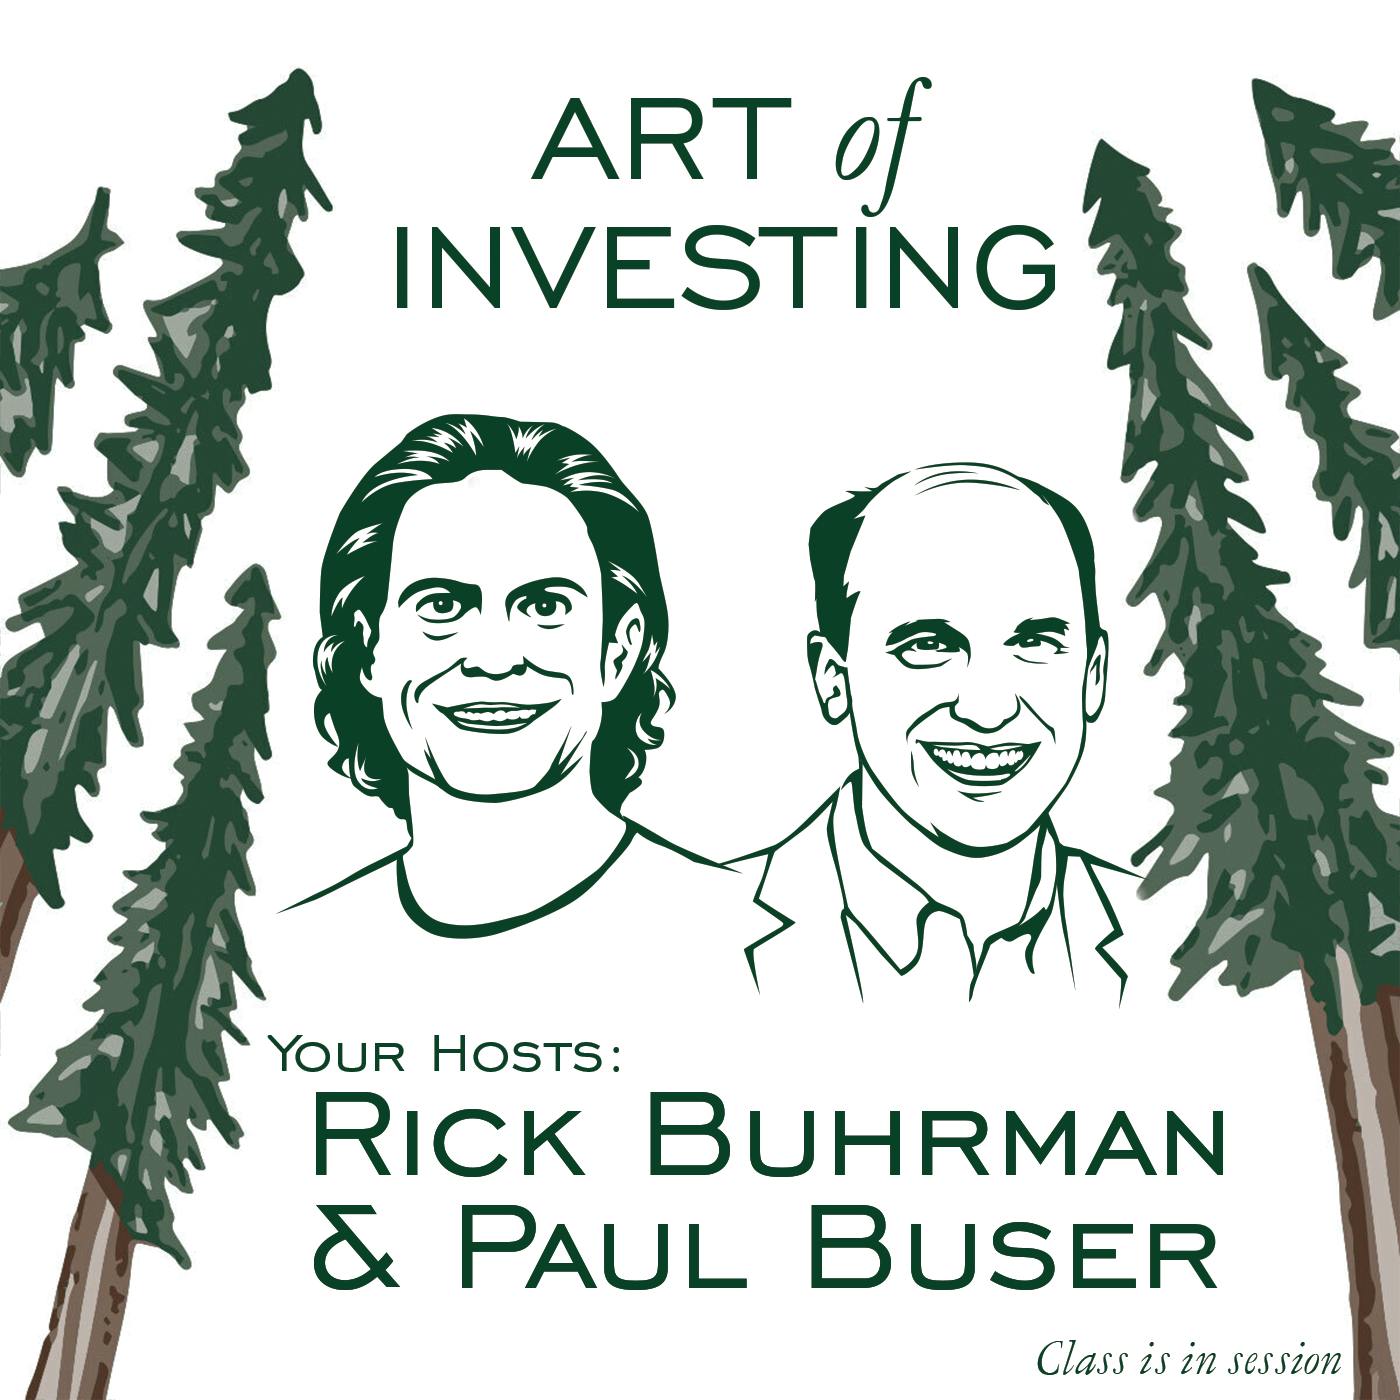 Rick Buhrman & Paul Buser - Find Your X, Nurture Your N - [Invest Like the Best]